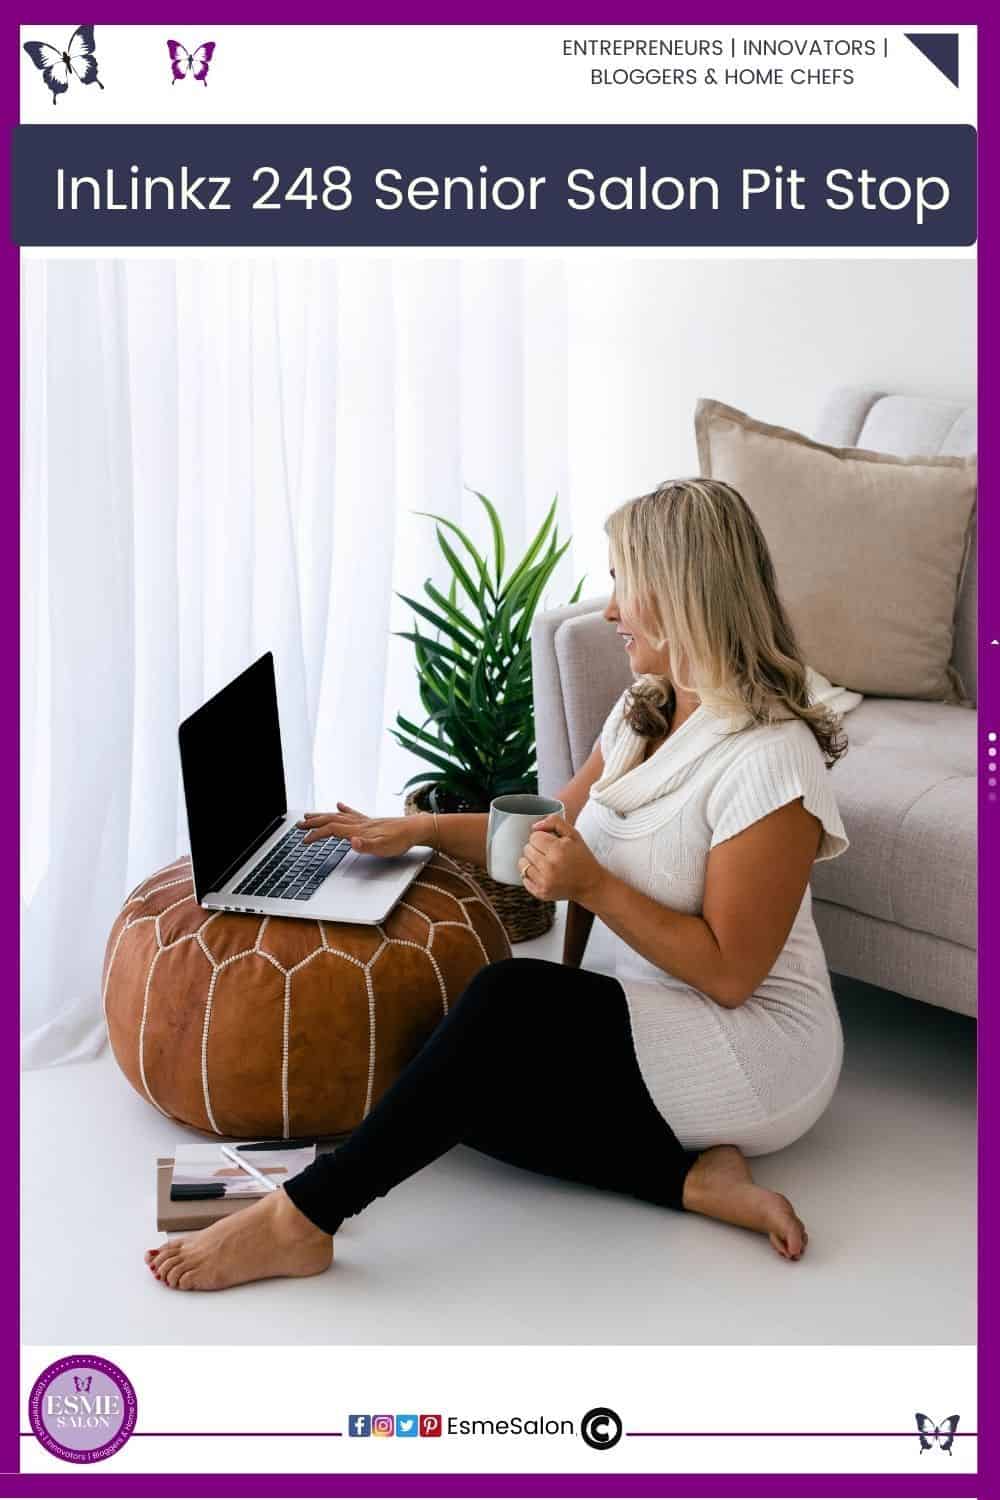 An image a a lady dressed in black stretch pants, with a white short sleeve top sitting on the floor behind a round brown cushion with her laptop and holding a mug of coffee